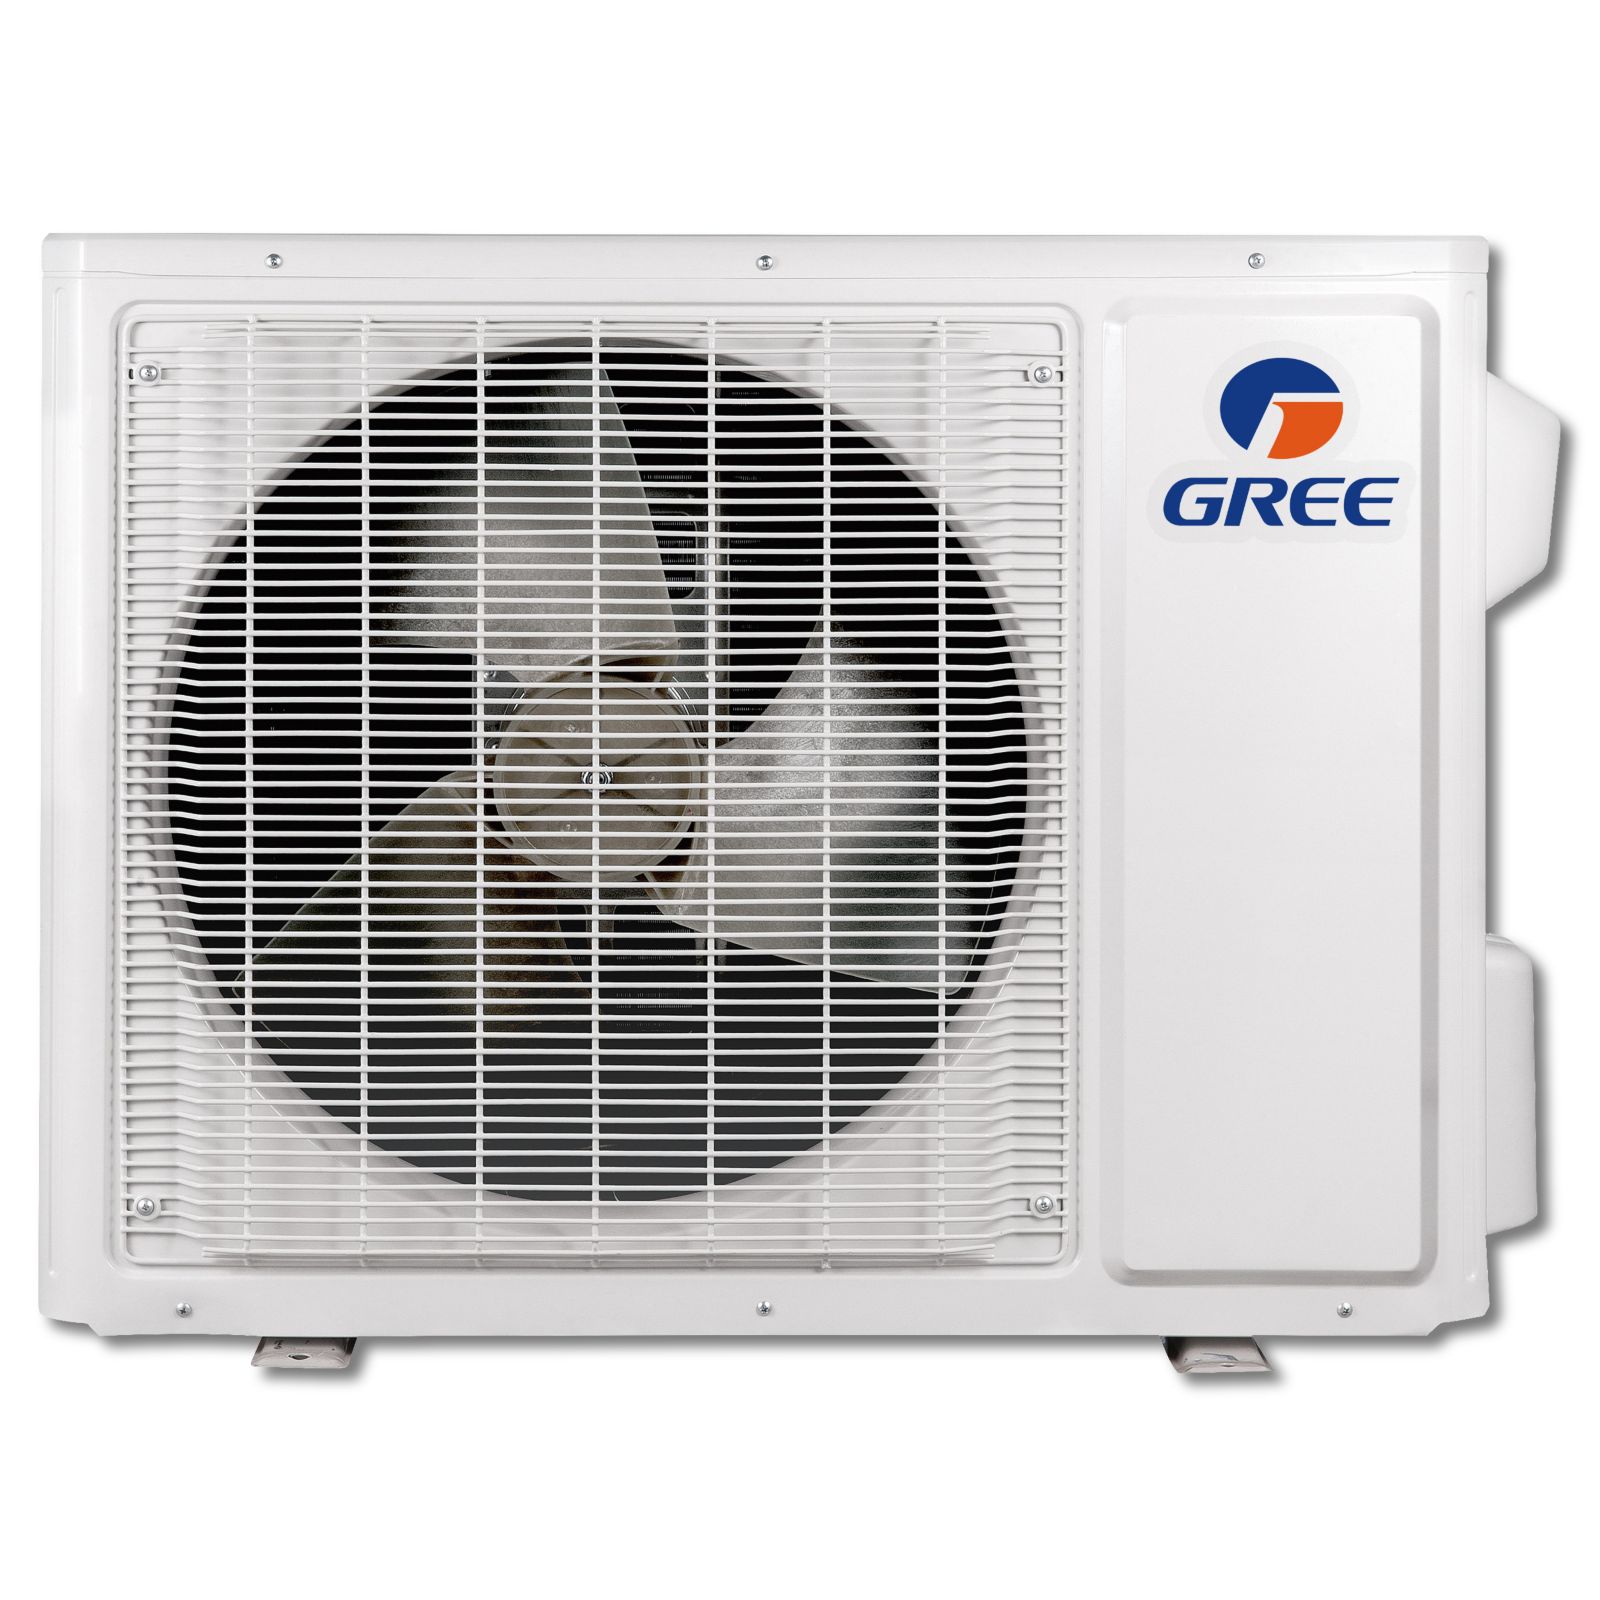 GREE RIO24HP230V1AO - RIO Ductless Outdoor Unit 208-230/60 High Efficiency DC Inverter Technology 16 SEER, 10.0 EER, 9.5 HSPF